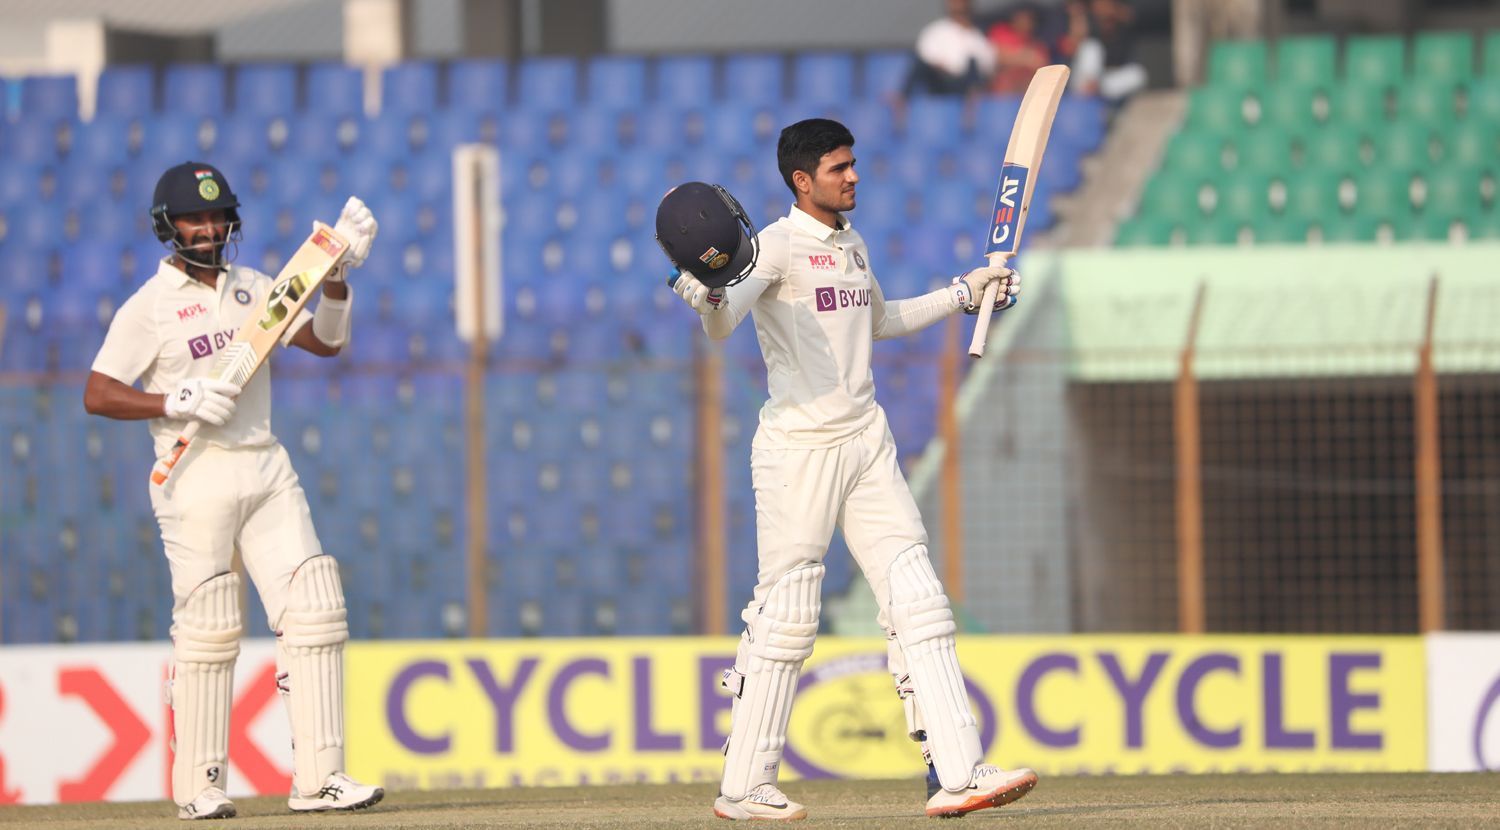 Shubman Gill scored a century in the first Test against Bangladesh. [P/C: BCCI]